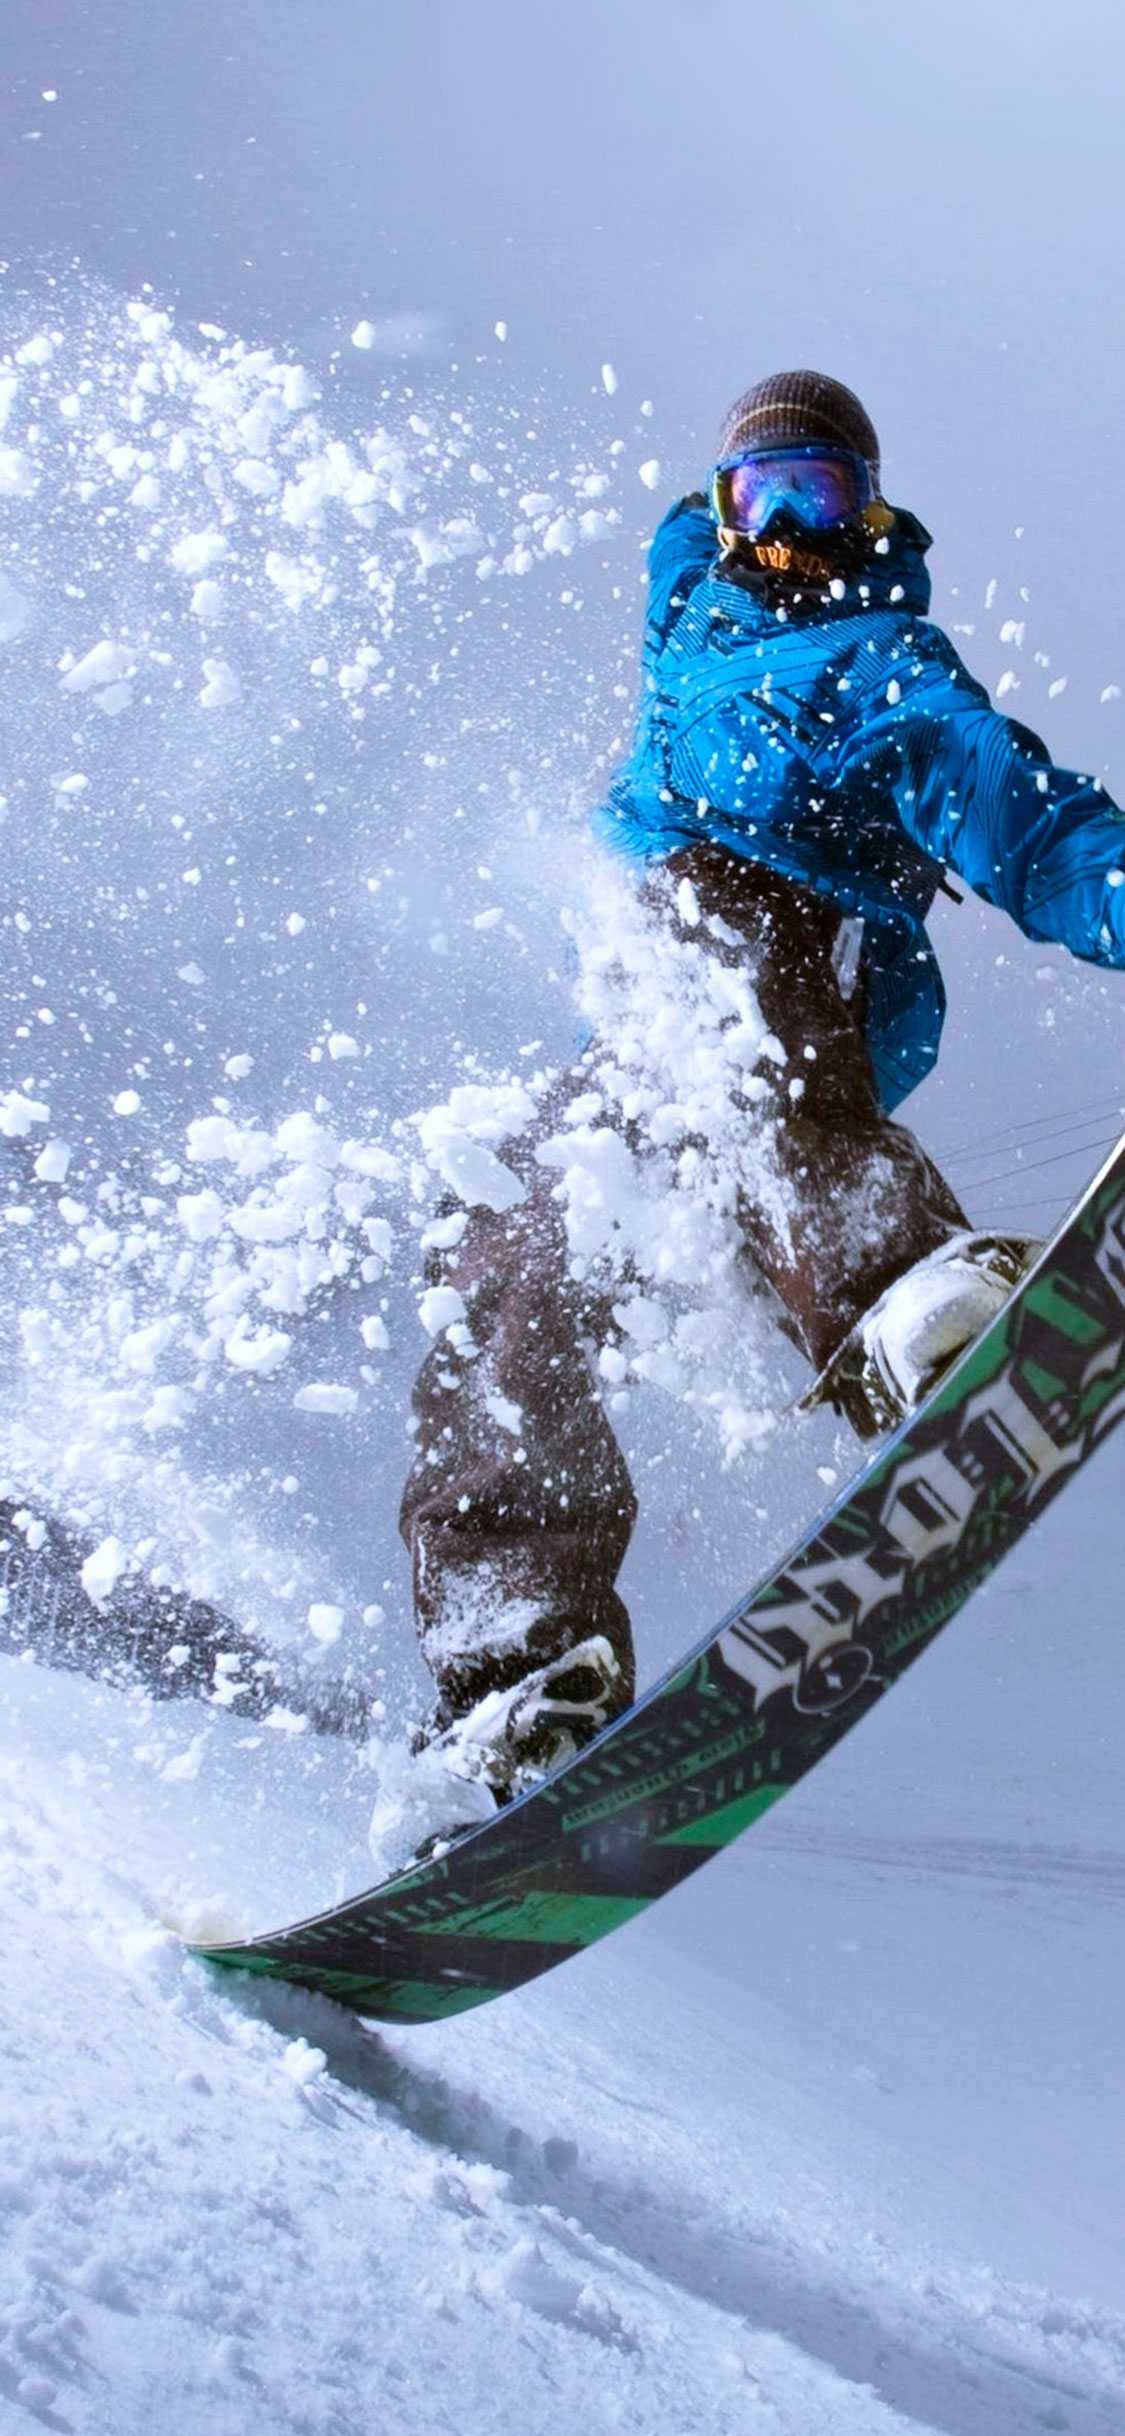 Snowboarding: Off-piste snowboarding style, Freeriding winter sport, Extreme activity. 1130x2440 HD Background.